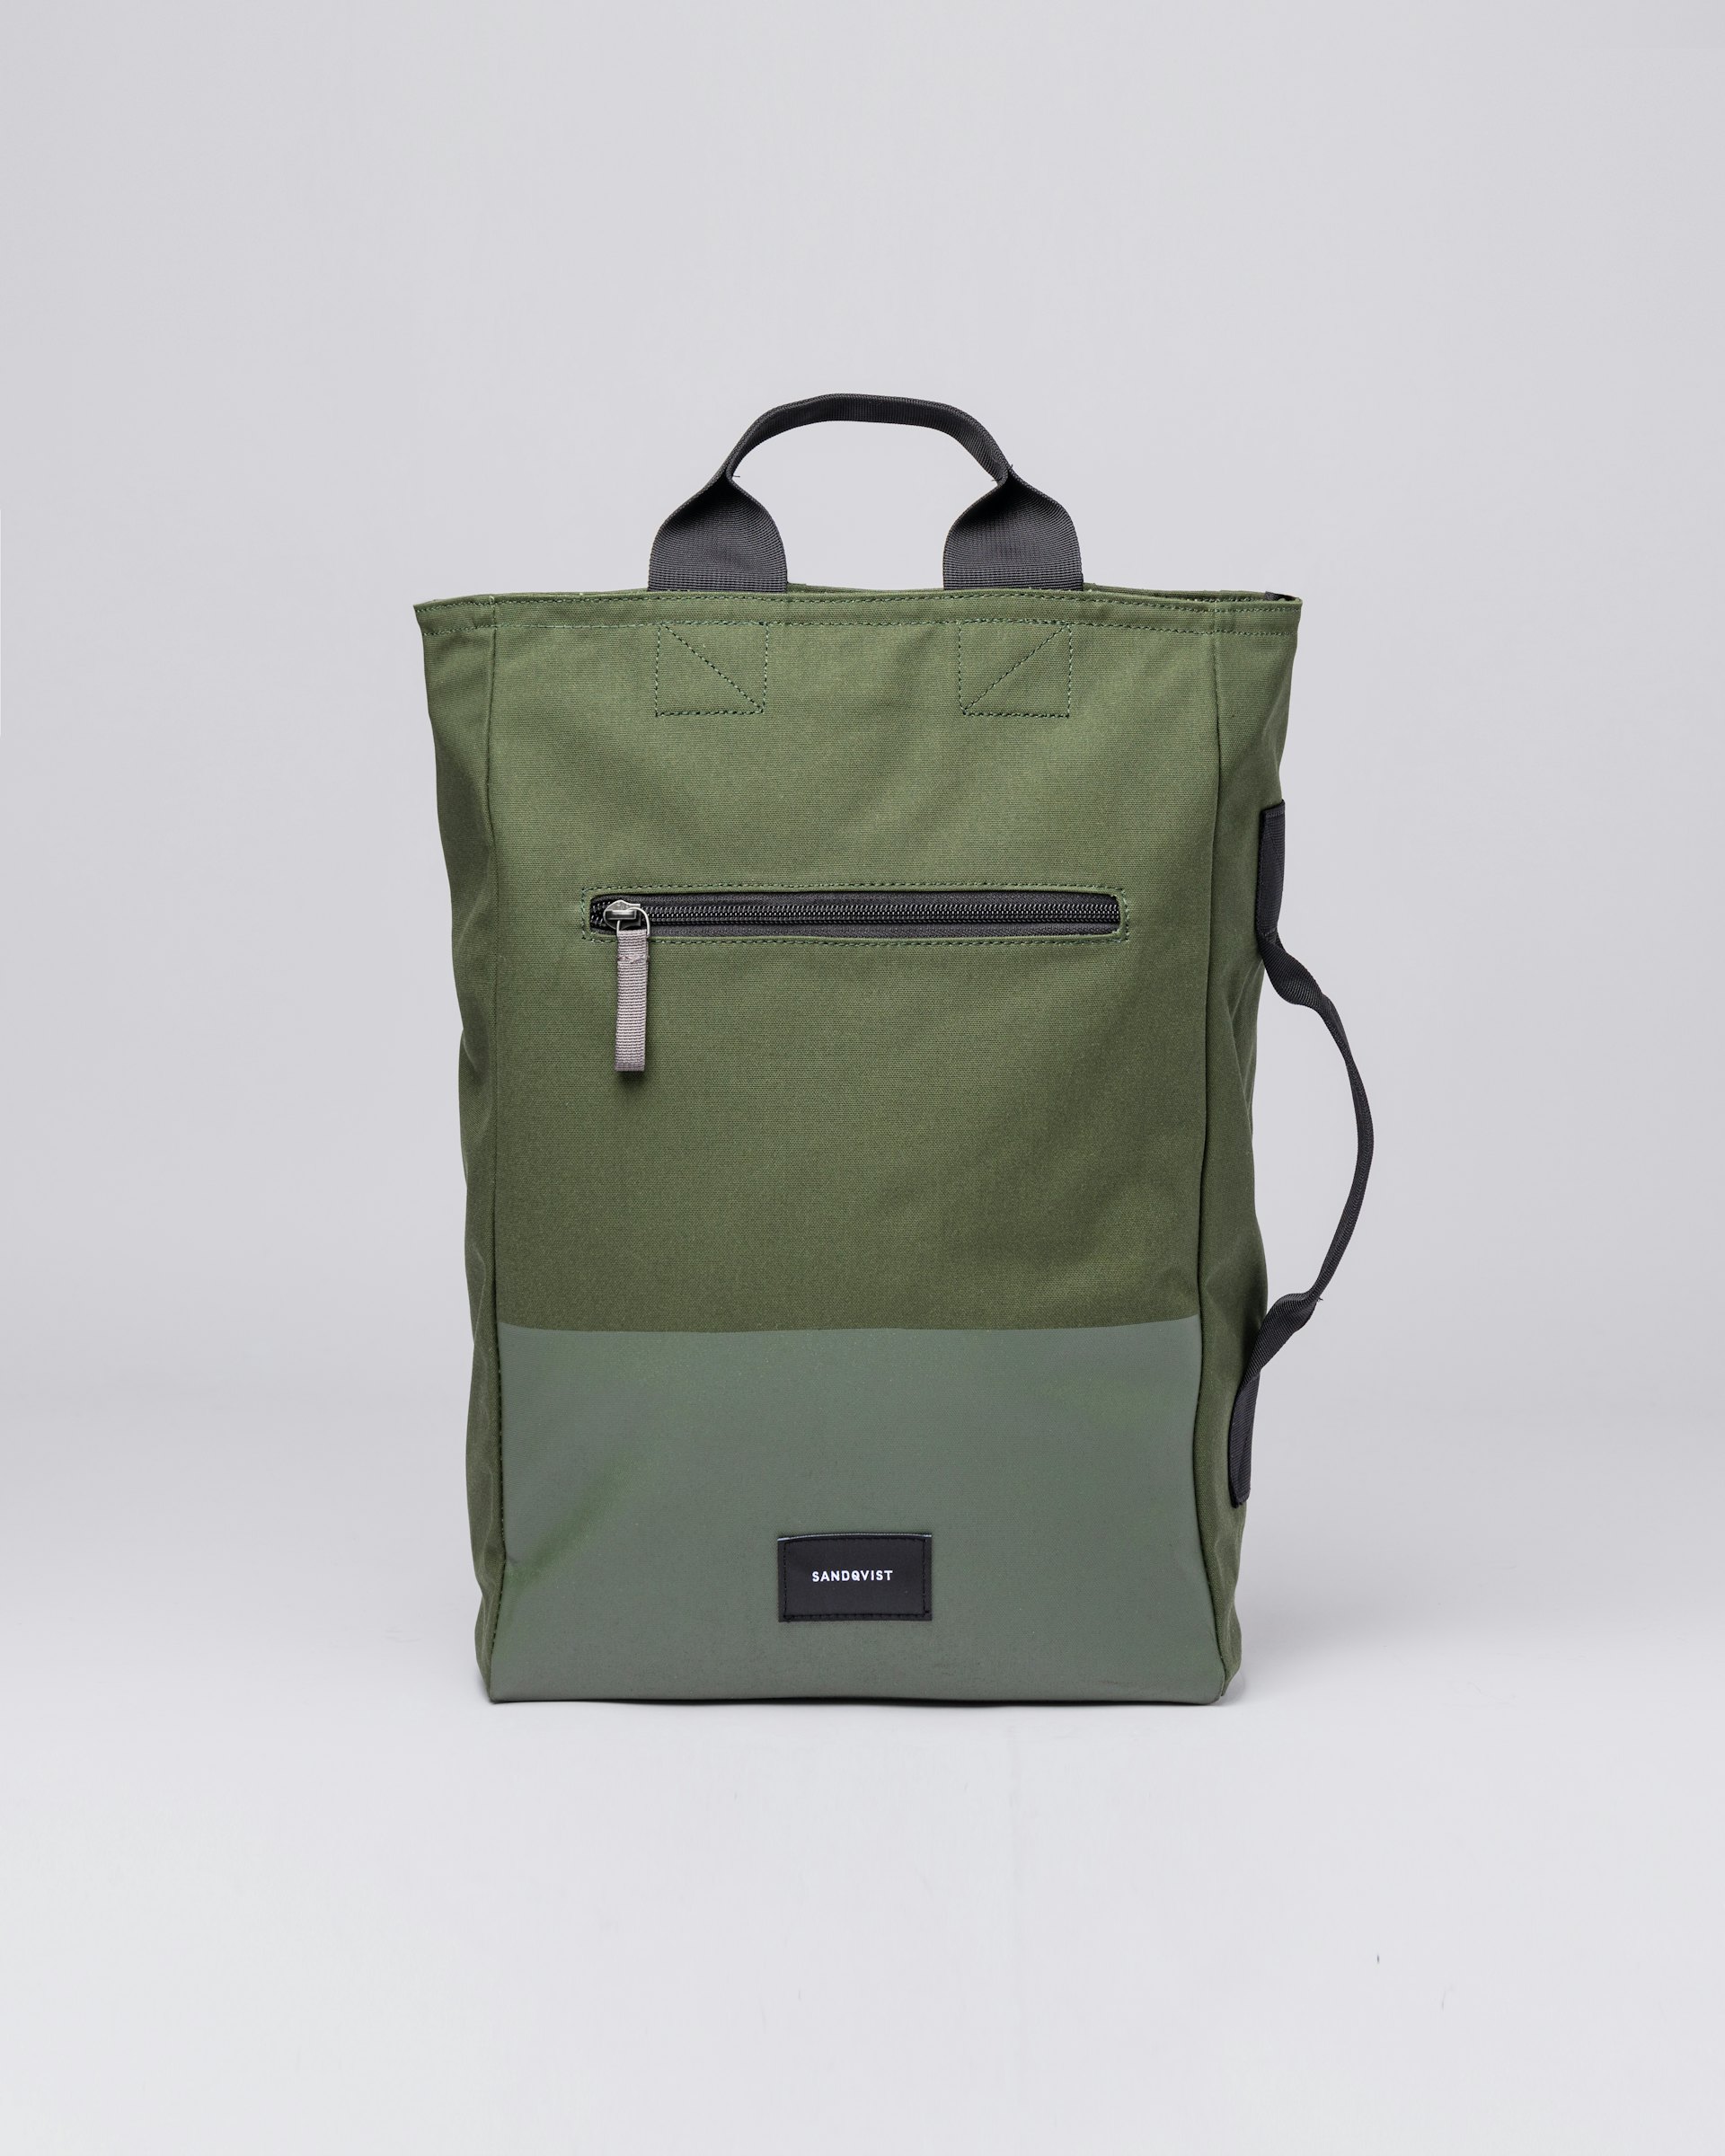 Tony vegan belongs to the category Backpacks and is in color dawn green (1 of 5)